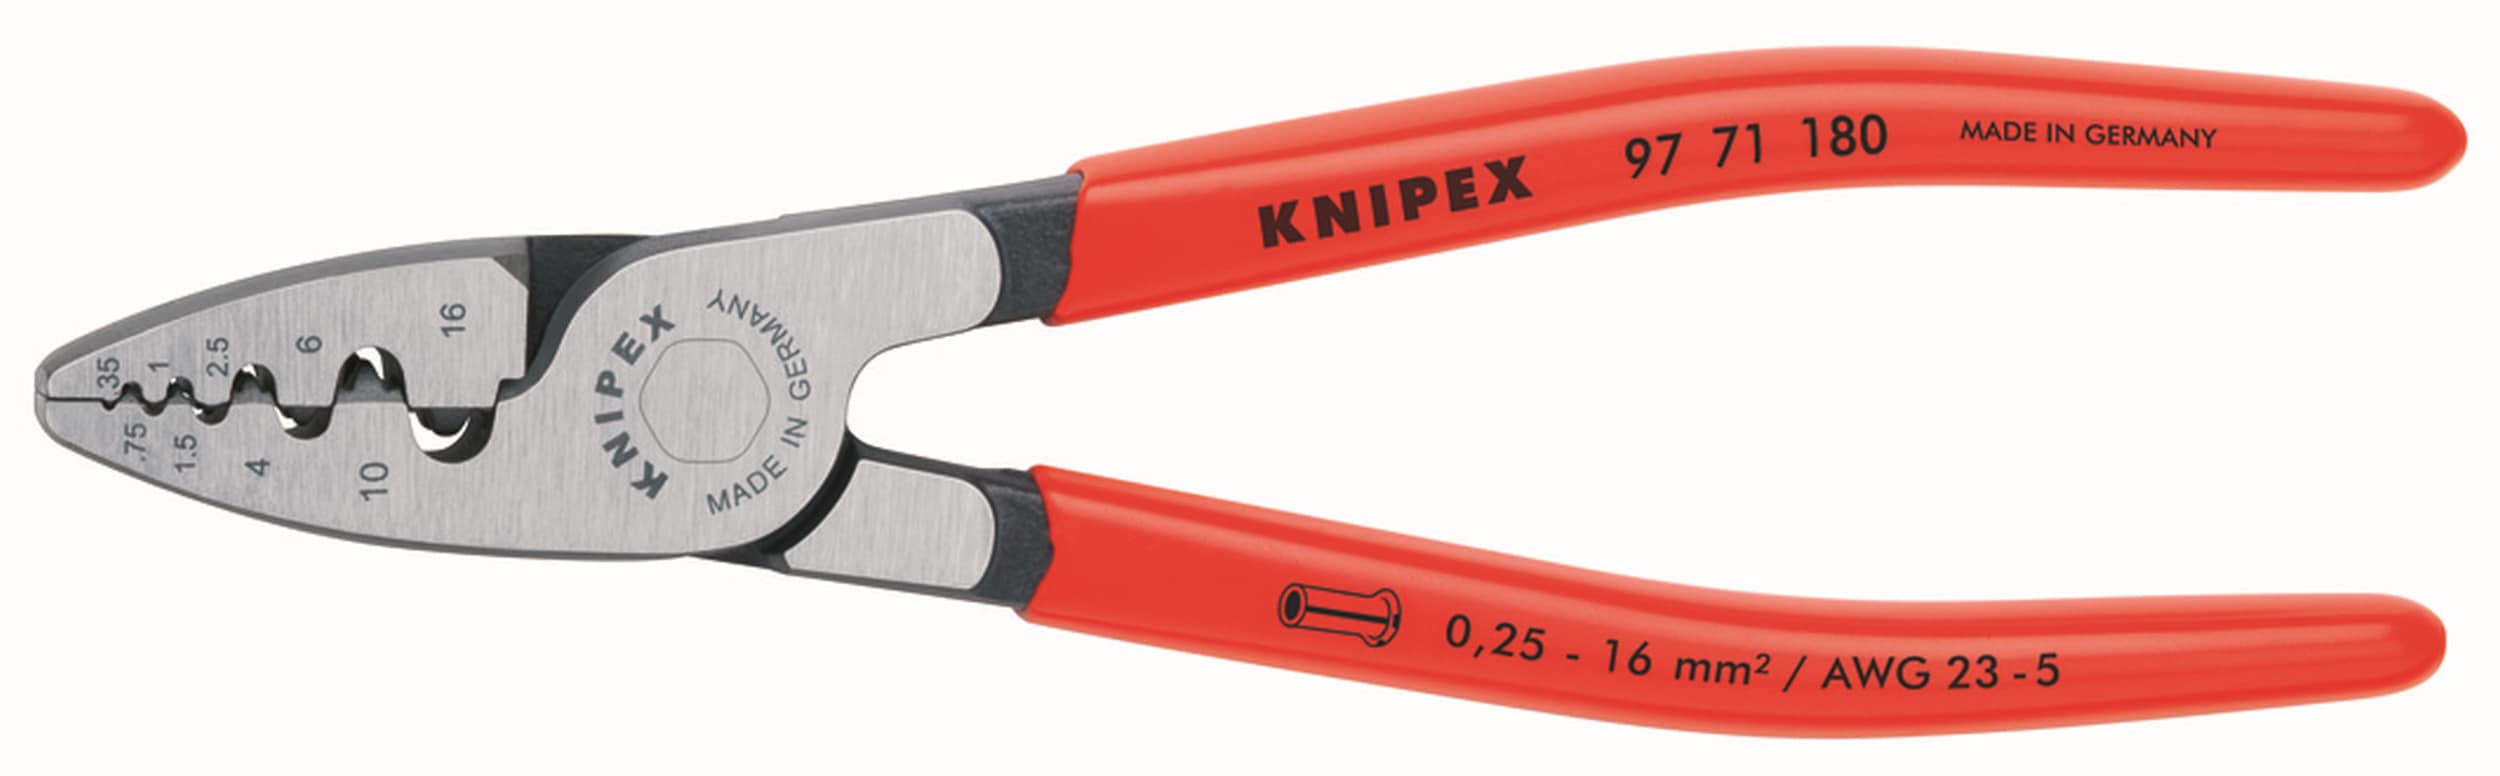 lol leninismen trist KNIPEX 7.1-in Pliers in the Pliers department at Lowes.com